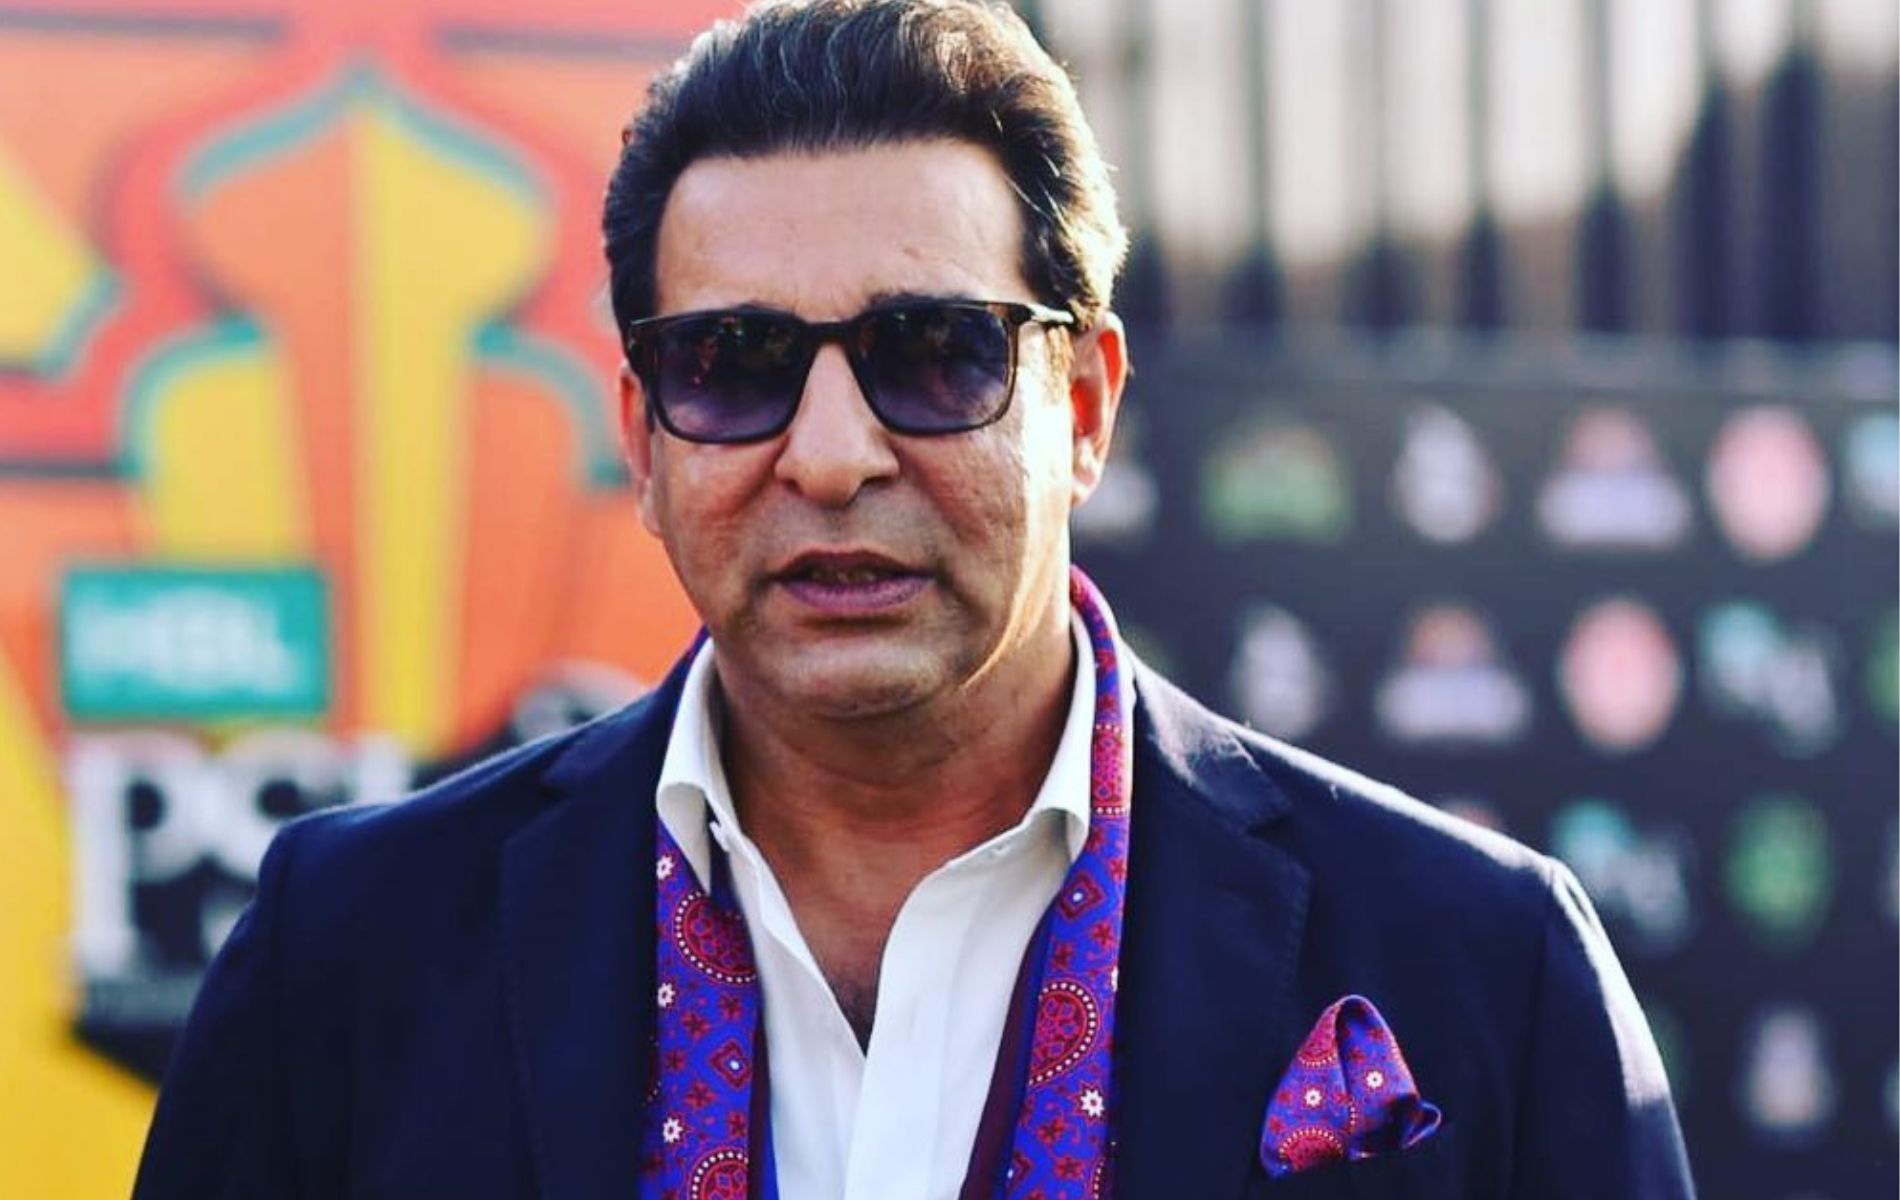 Wasim Akram requested Indian and Pakistani supporters to not celebrate each other